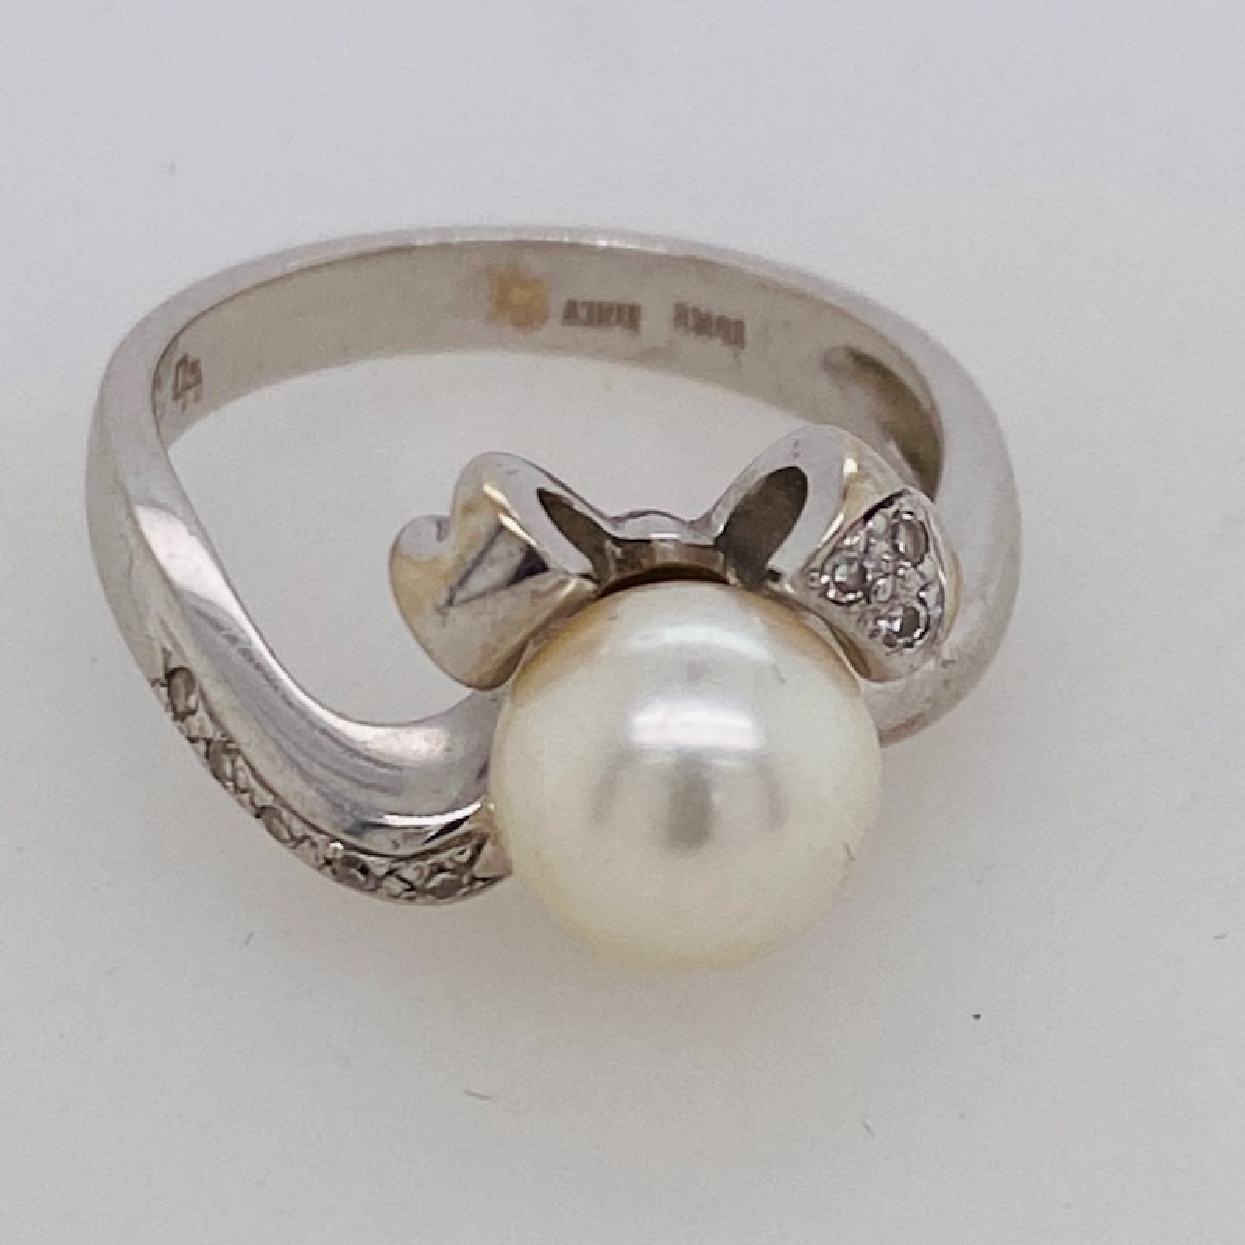 18K White Gold Pearl Bypass Style Ring with Diamond Accents Size 7.5 